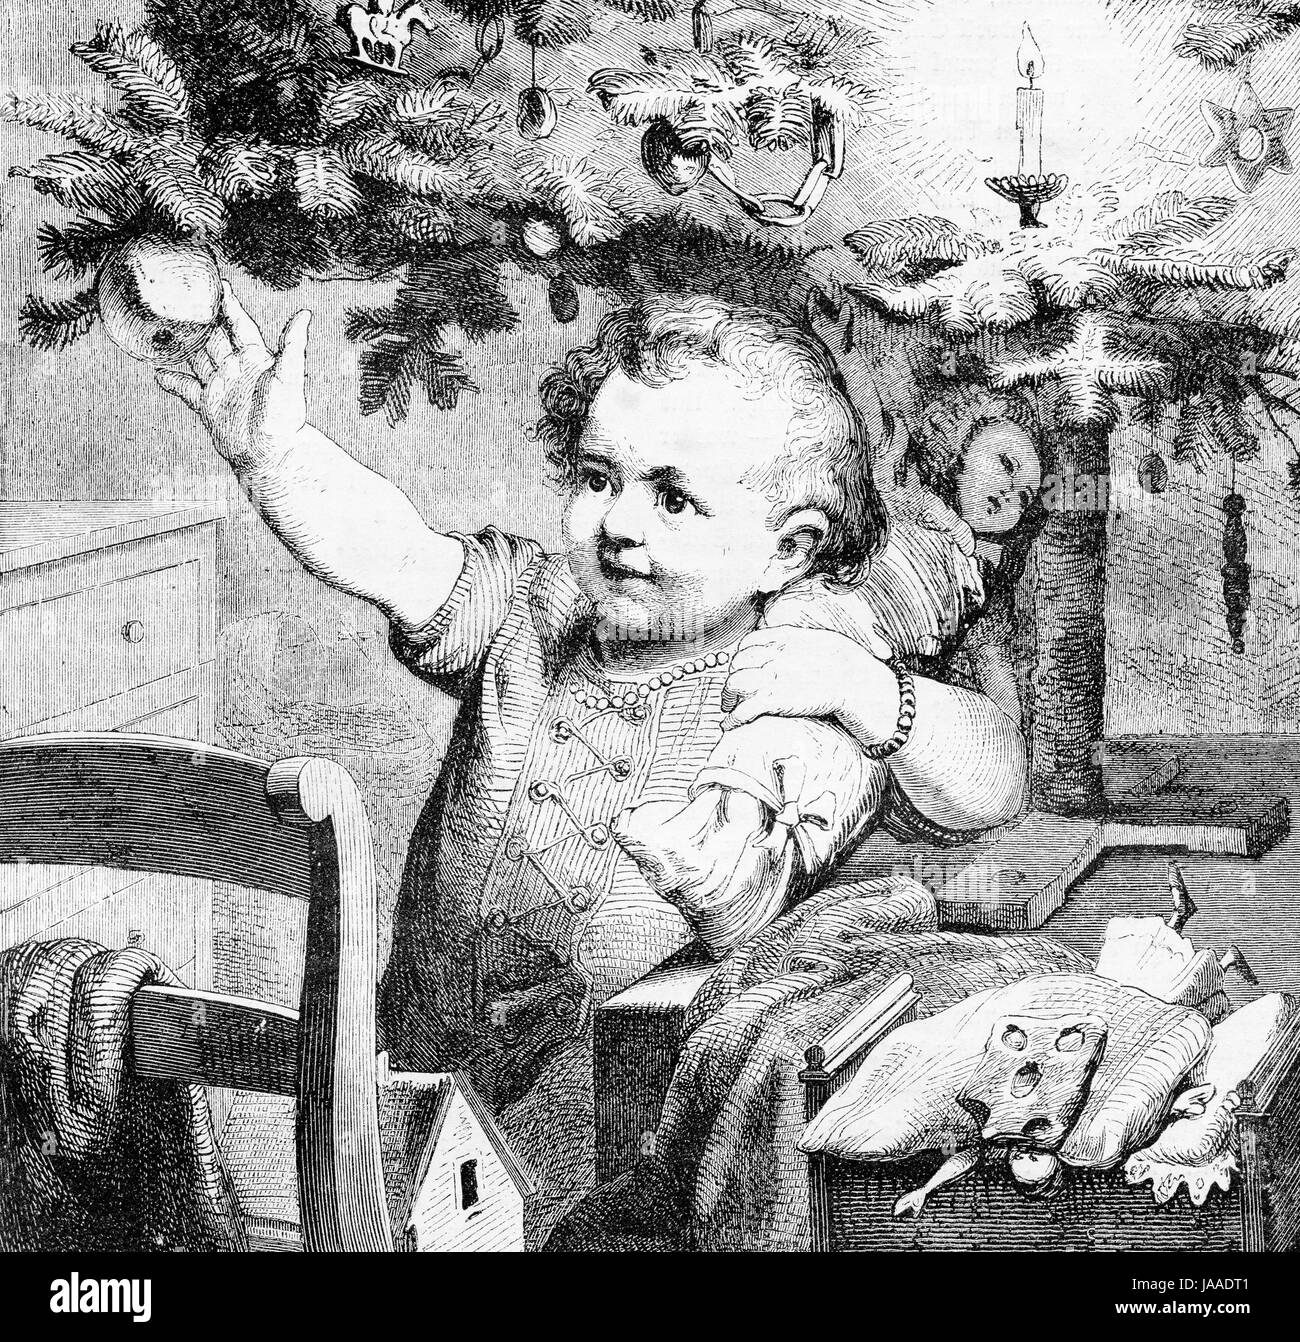 Toddler happy under the Christmas tree - engraving from XIX century Stock Photo